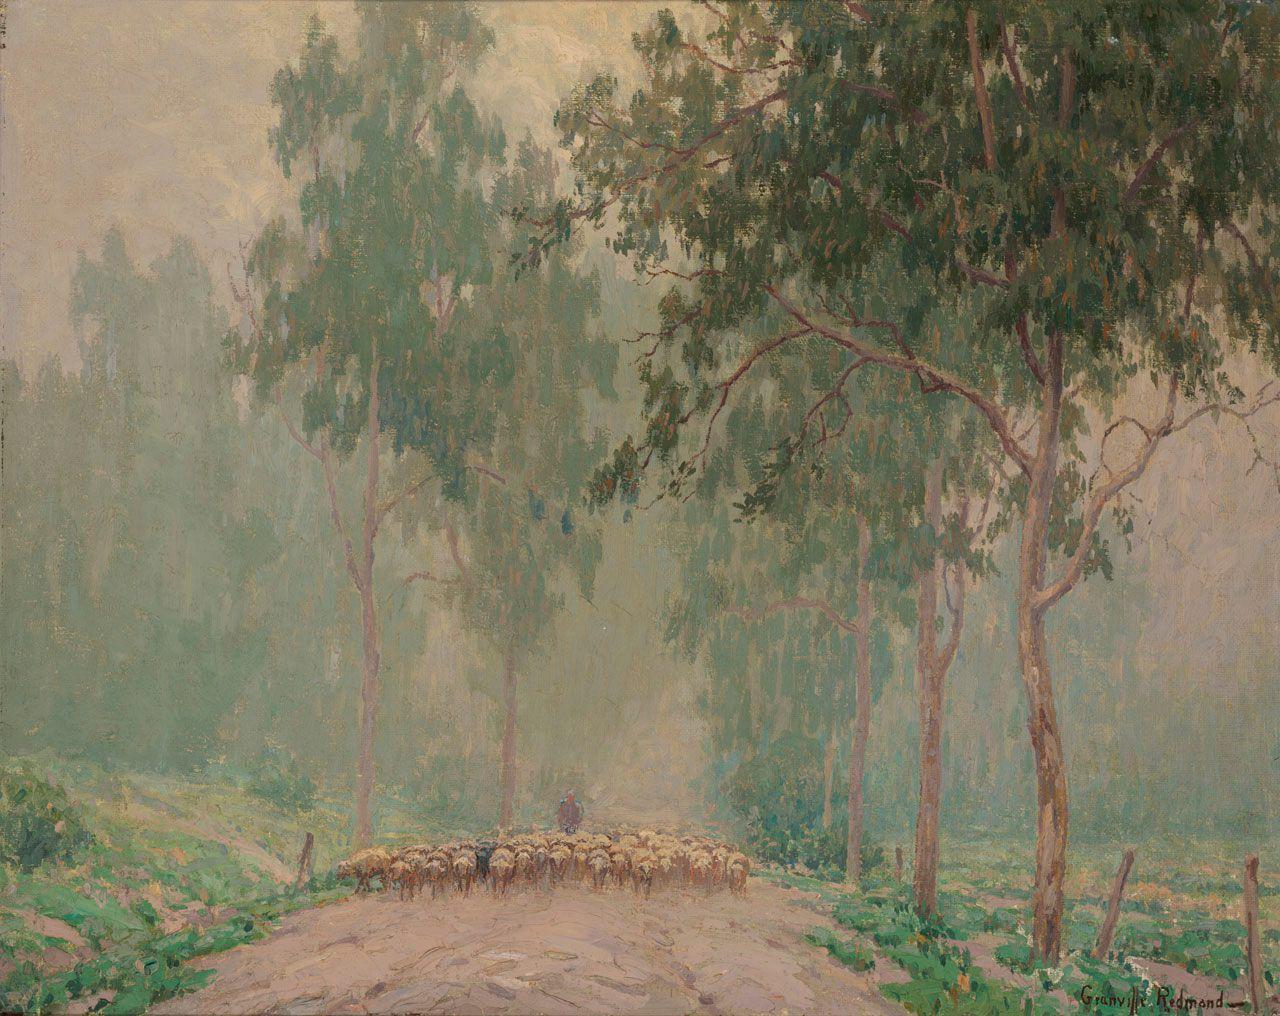 A Shepherd and his Flock in the Early Morning Mist
Granville  Redmond 
20th Century
2008.15